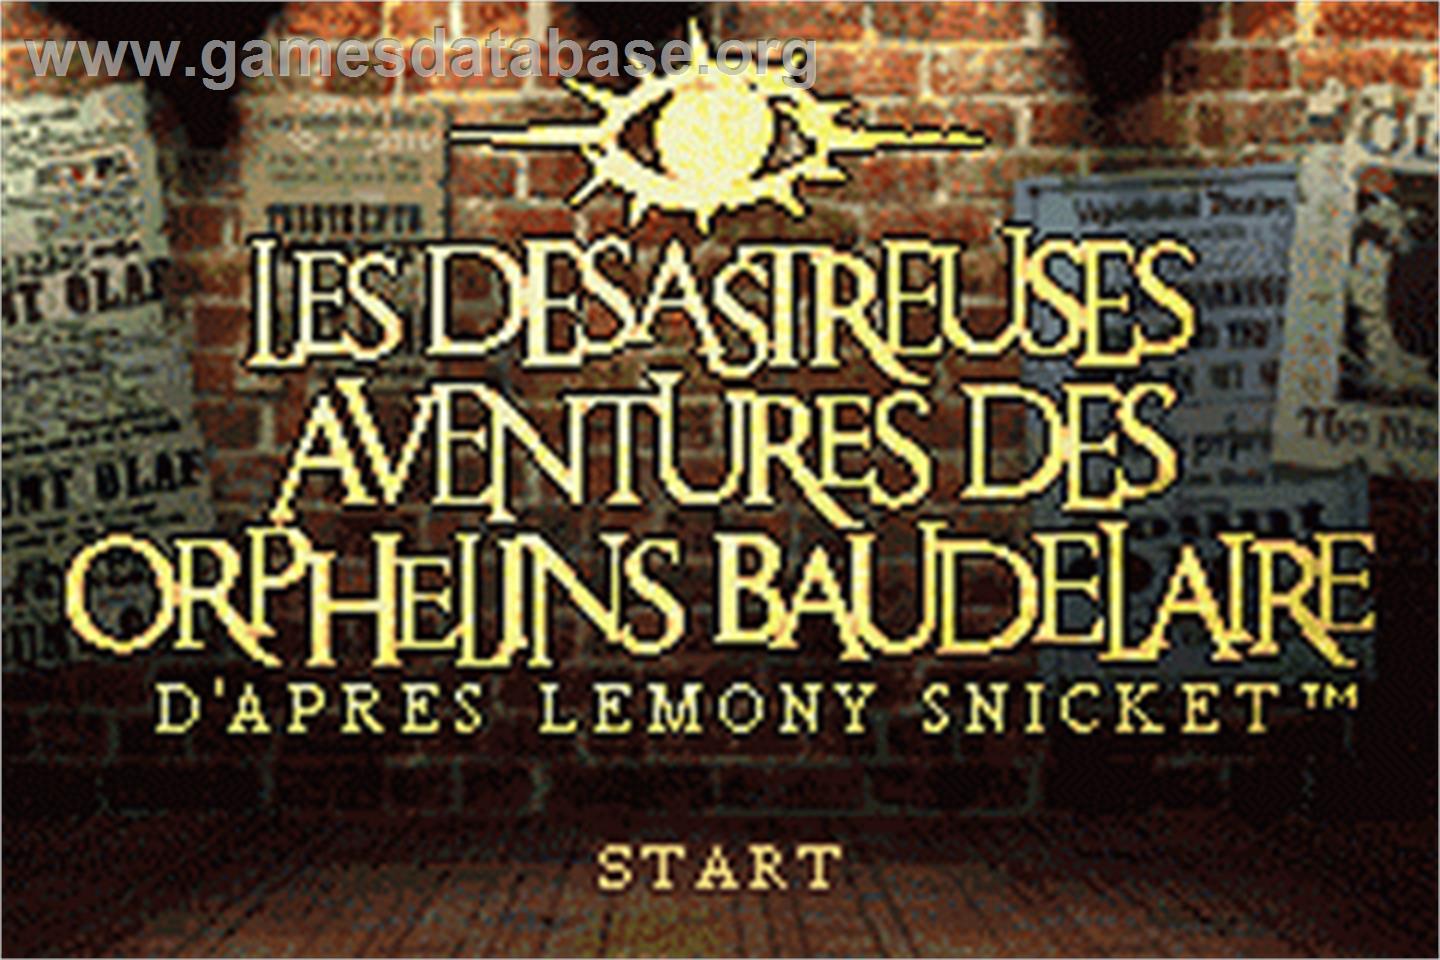 Lemony Snicket's A Series of Unfortunate Events - Nintendo Game Boy Advance - Artwork - Title Screen